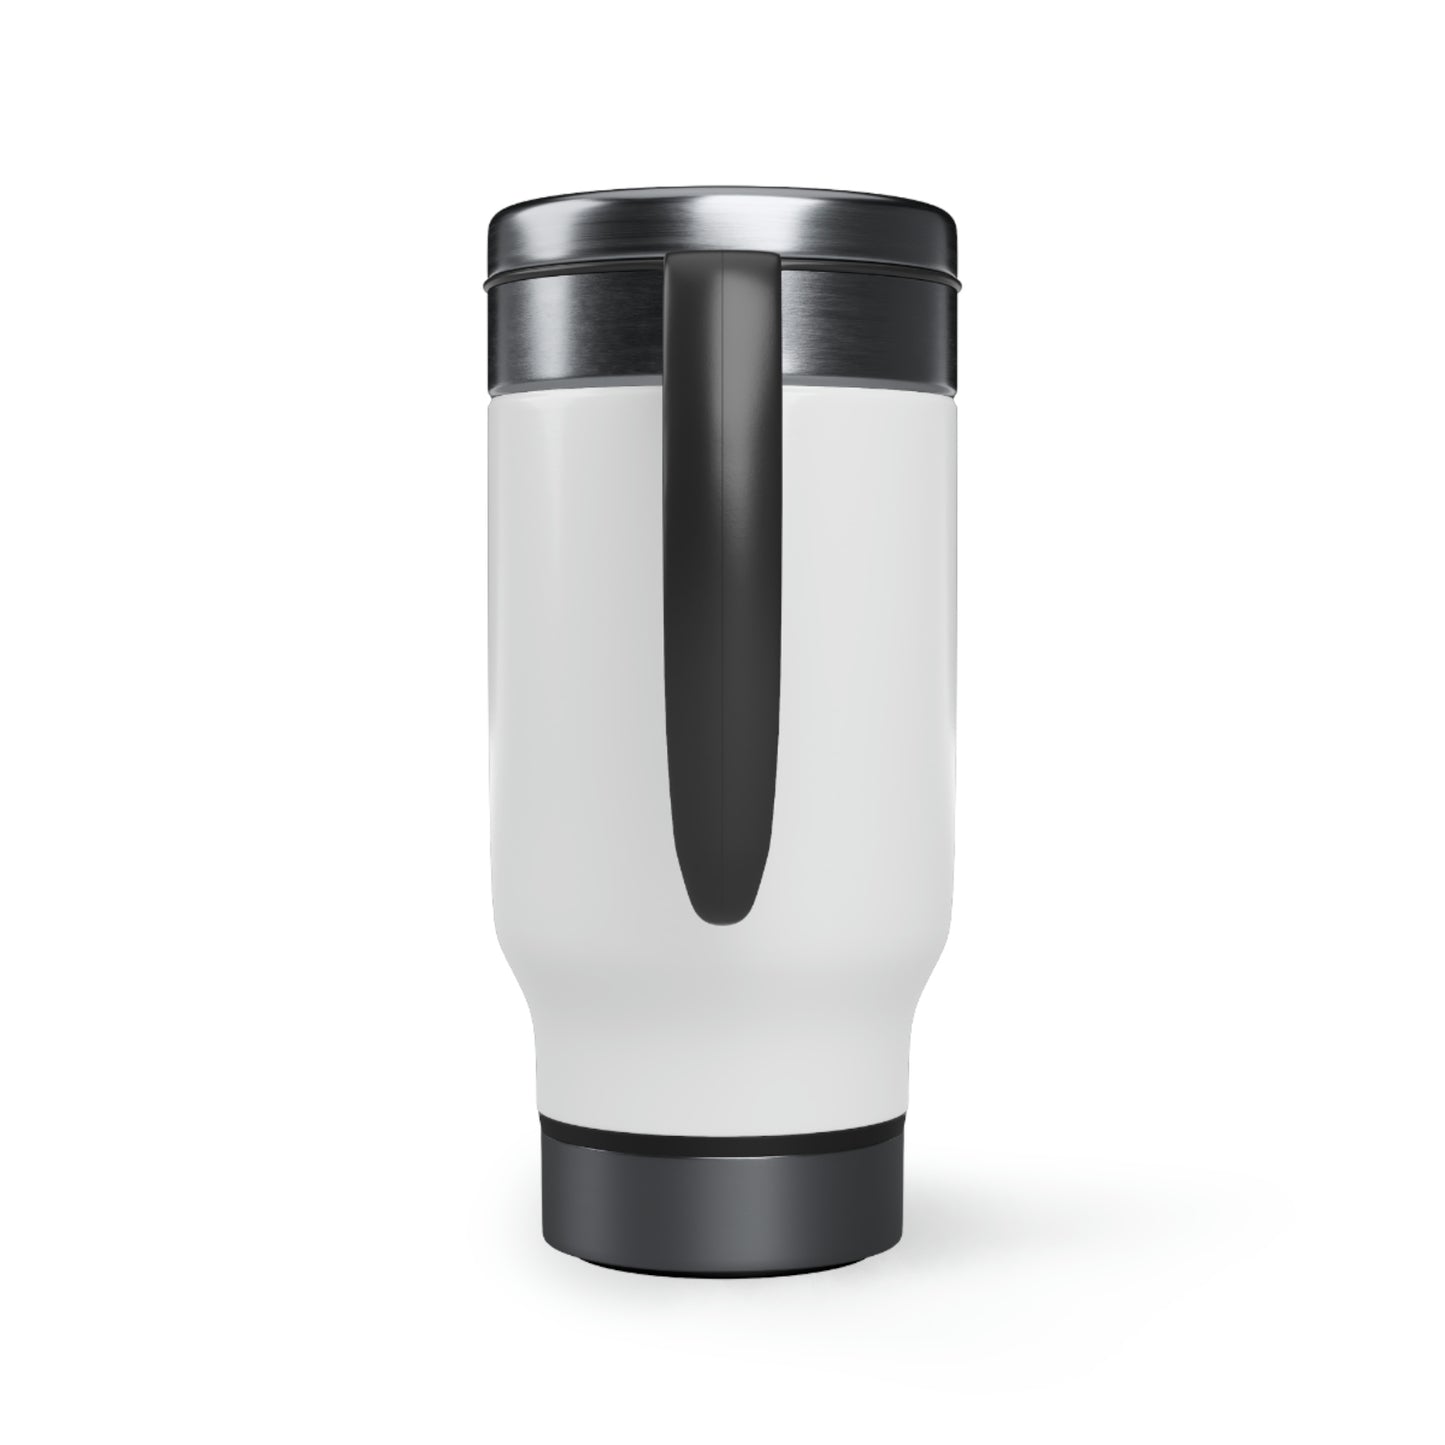 You Are Awesome! Stainless Steel Travel Mug with Handle, 14oz